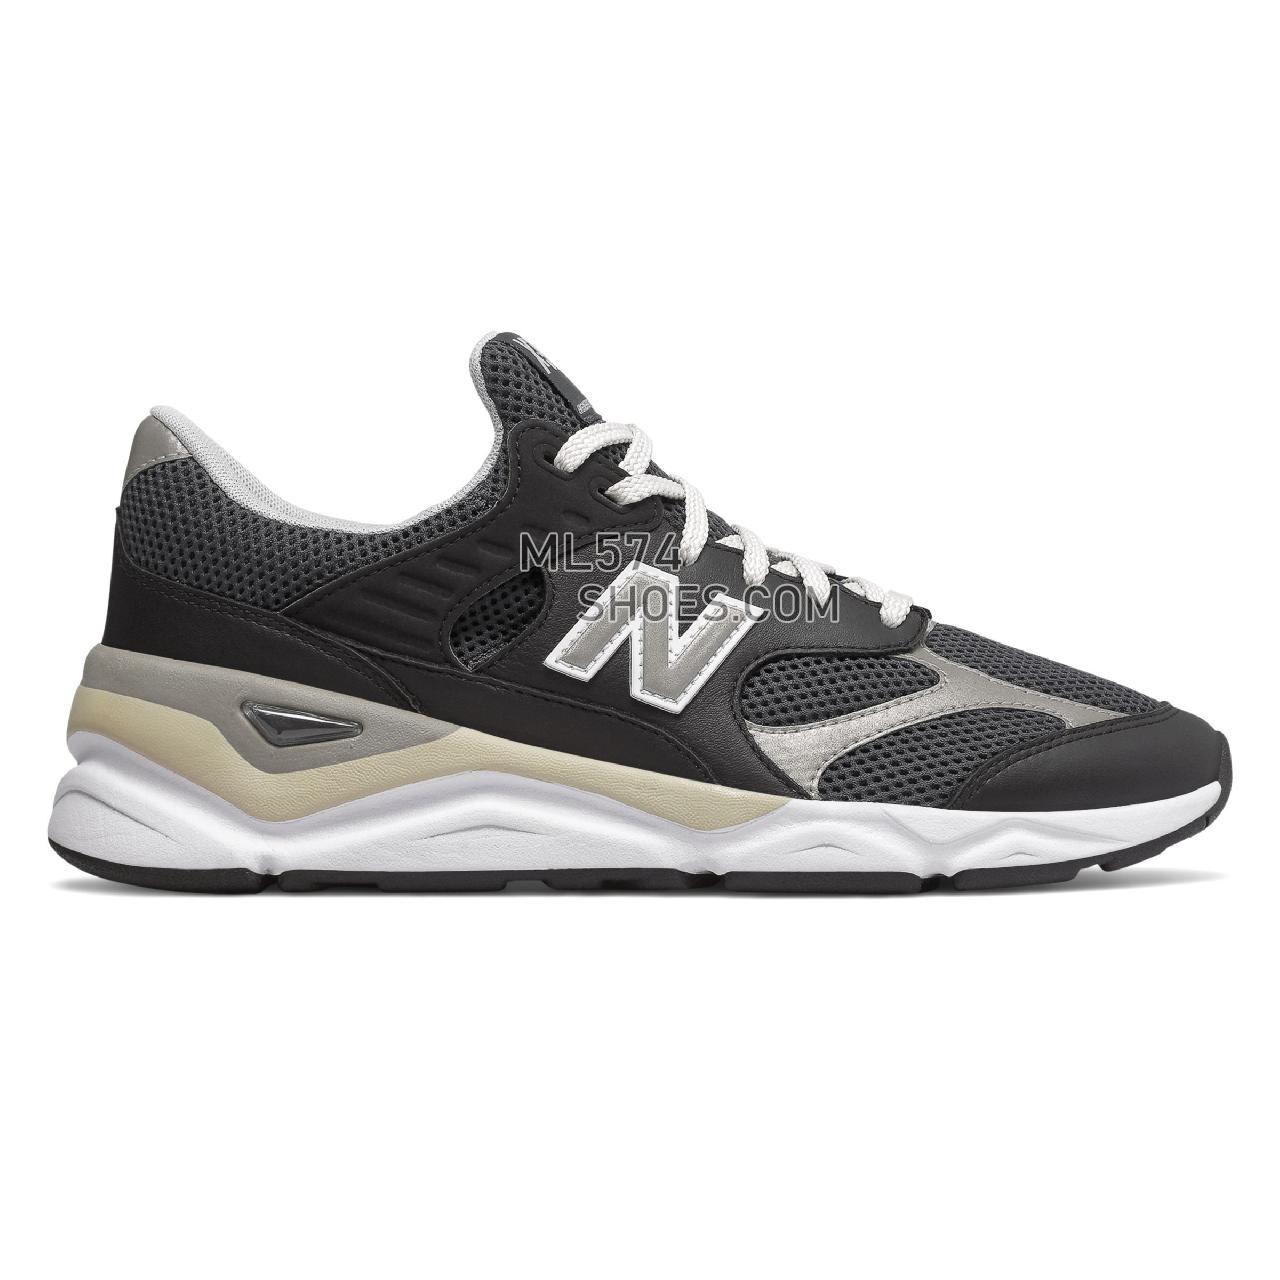 New Balance X-90 Reconstructed - Men's Sport Style Sneakers - Black with Orca - MSX90RPA